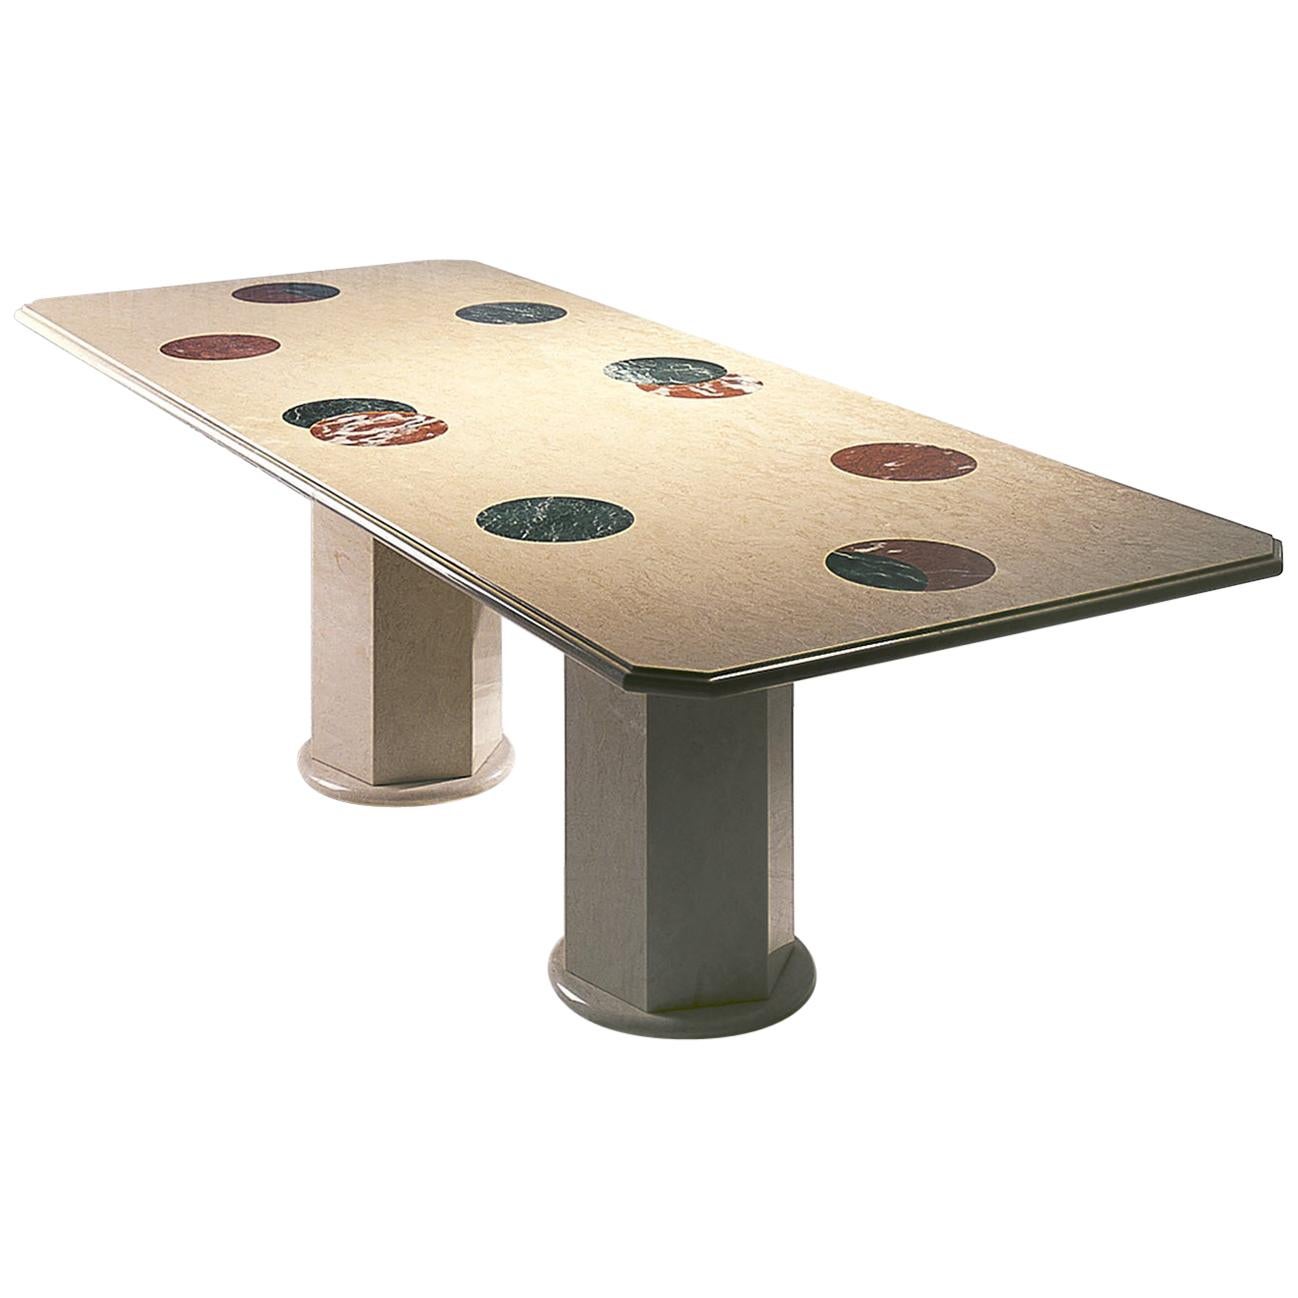 21st Century by Arch.A.Natalini Polychrome Marble Table with Inlaid Moon Phases For Sale